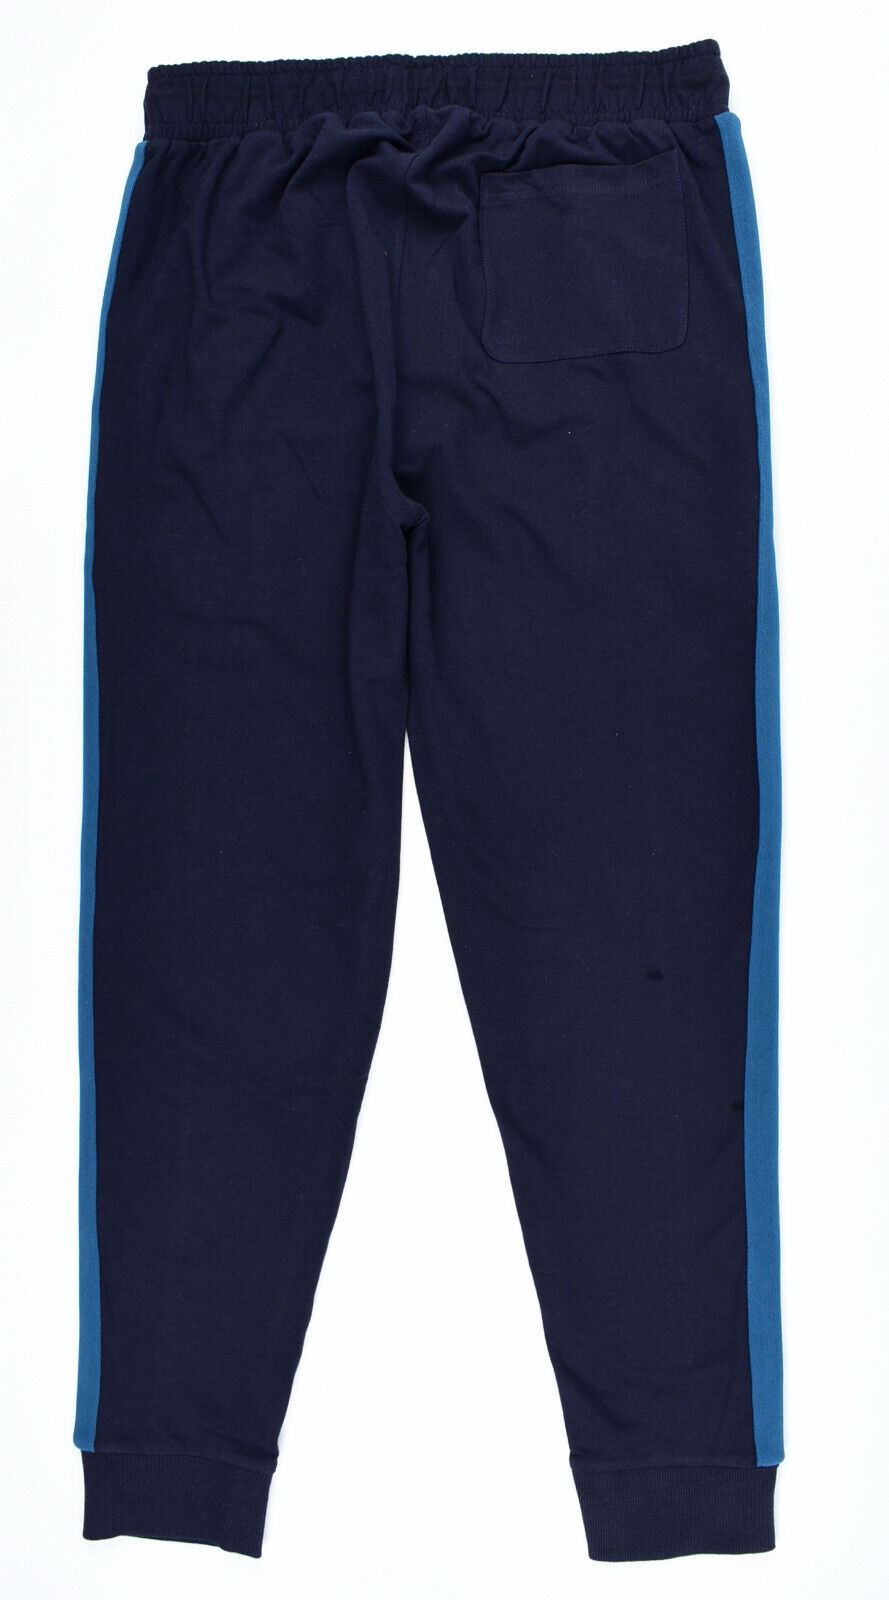 TED BAKER Men's French Terry Joggers, Lounging Pants, Navy Blue, Ted size 3 /M